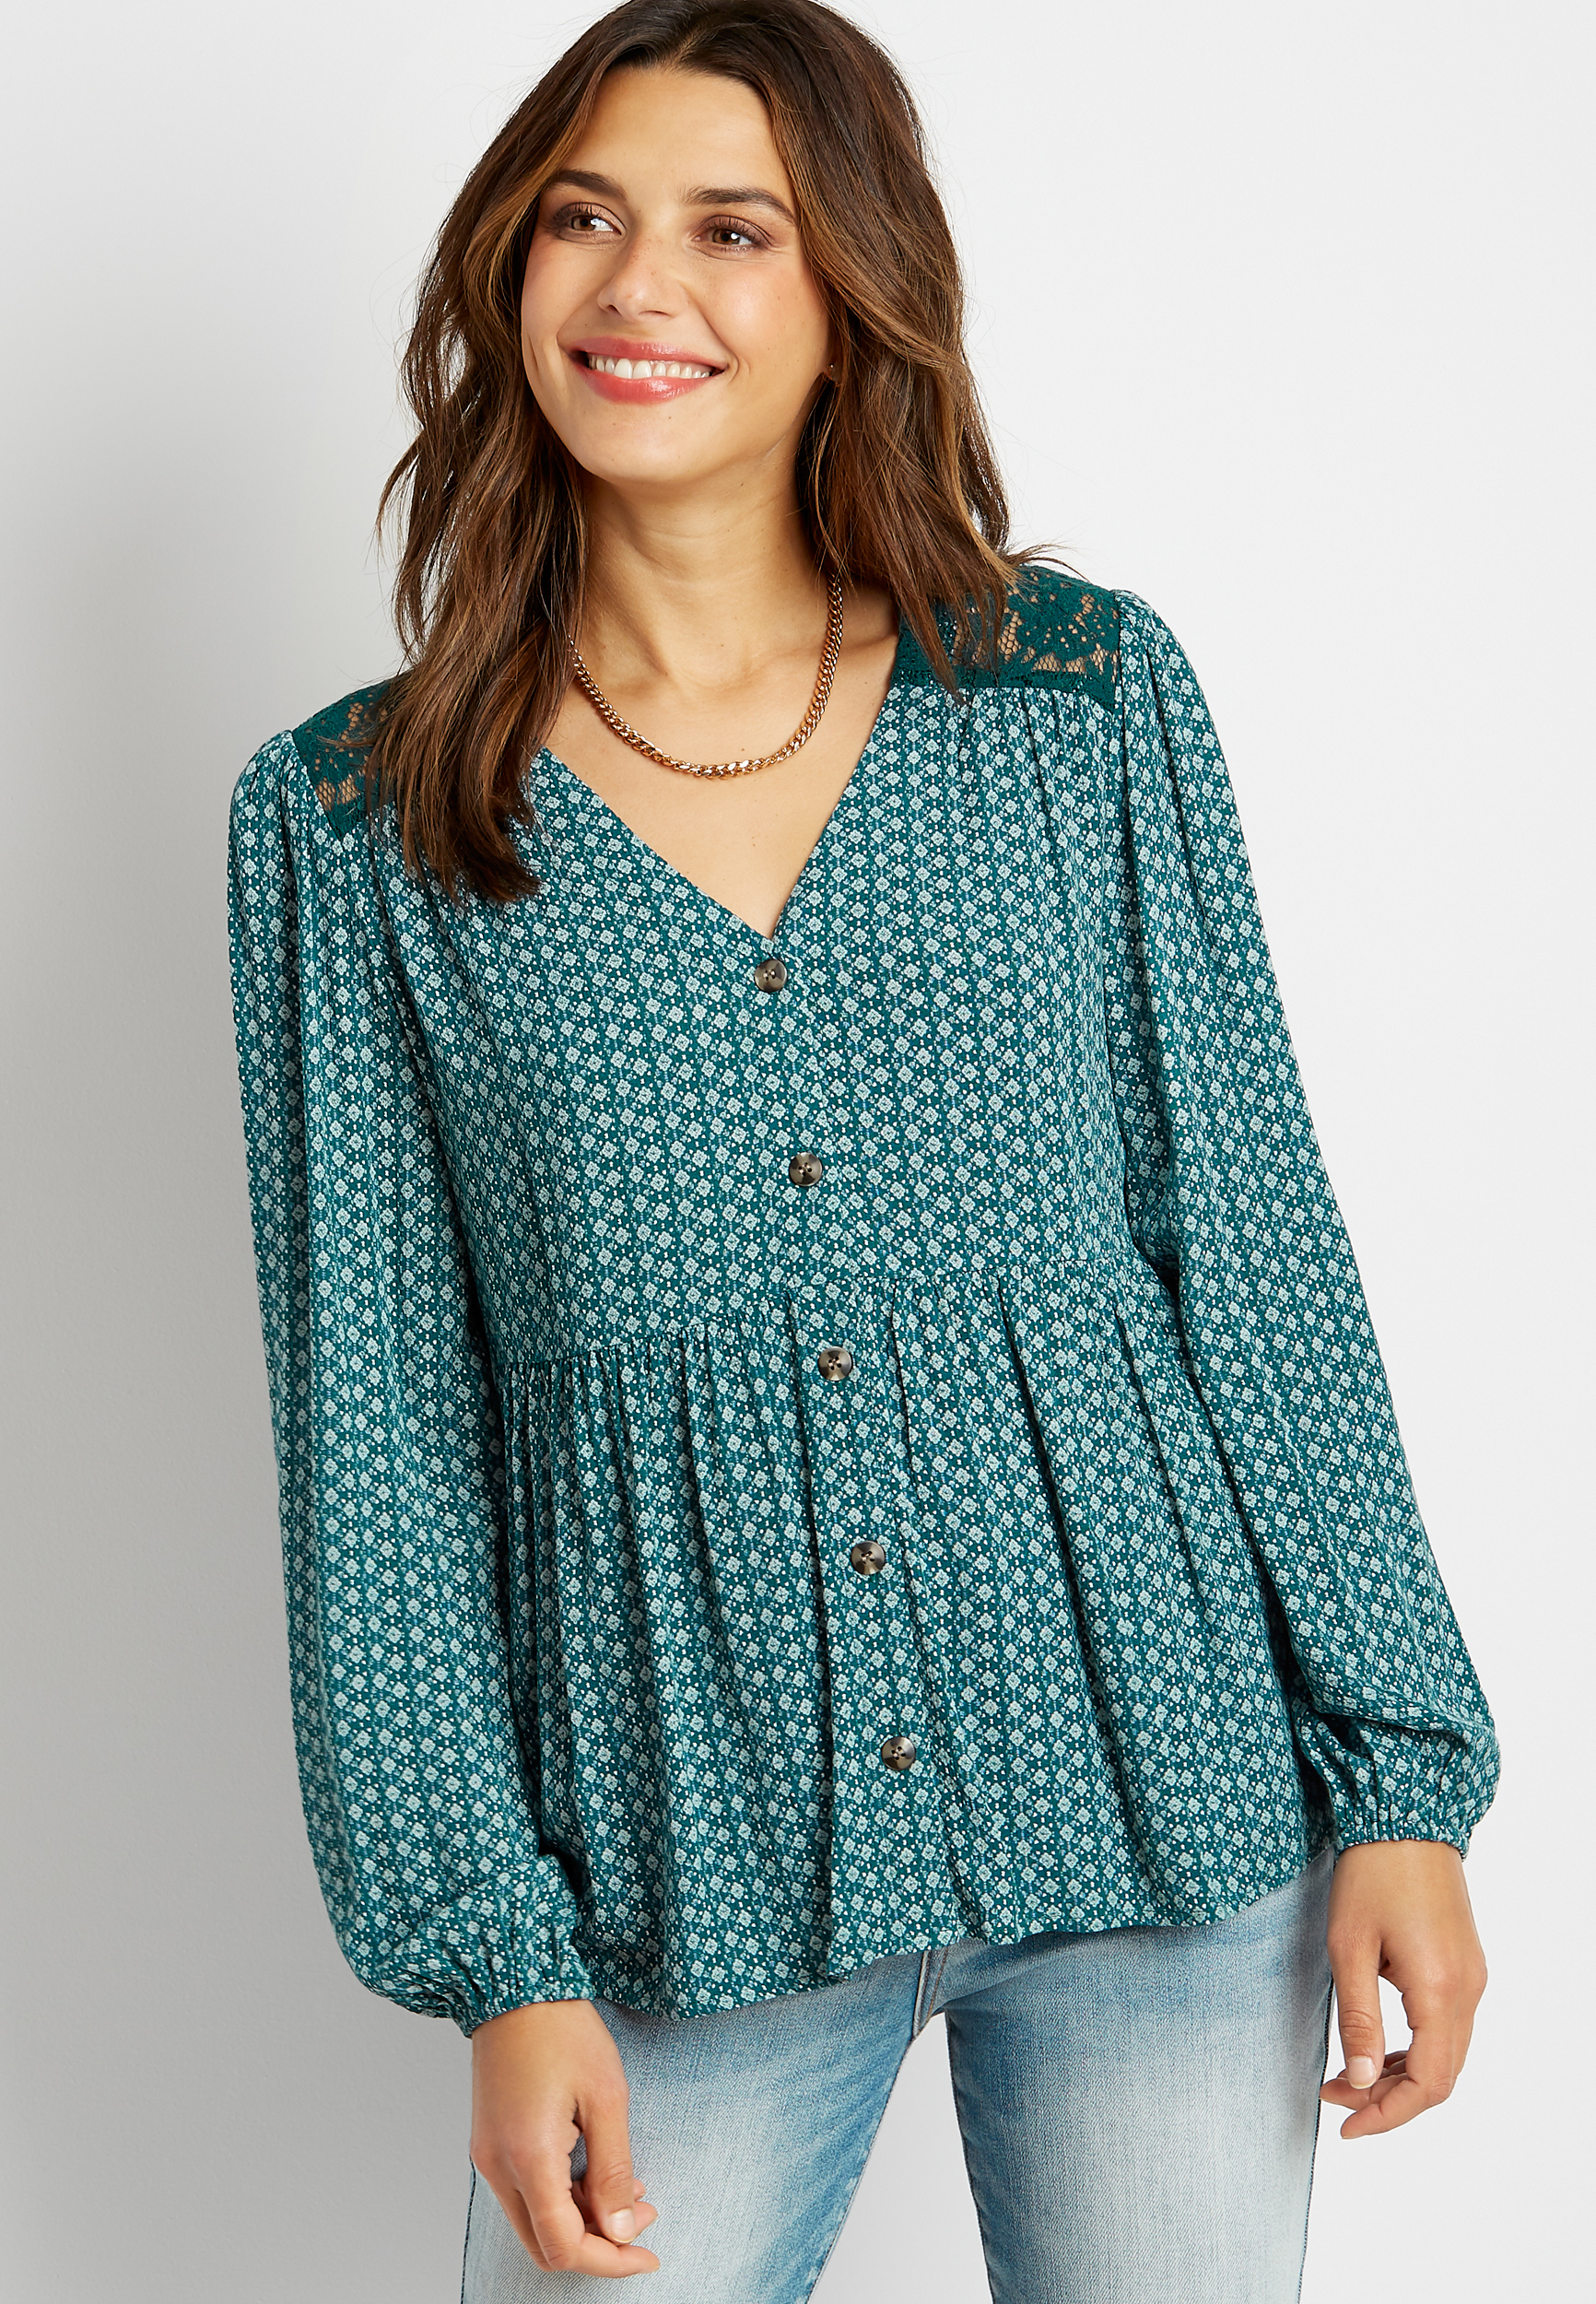 Blue Printed Button Front Babydoll Top | maurices